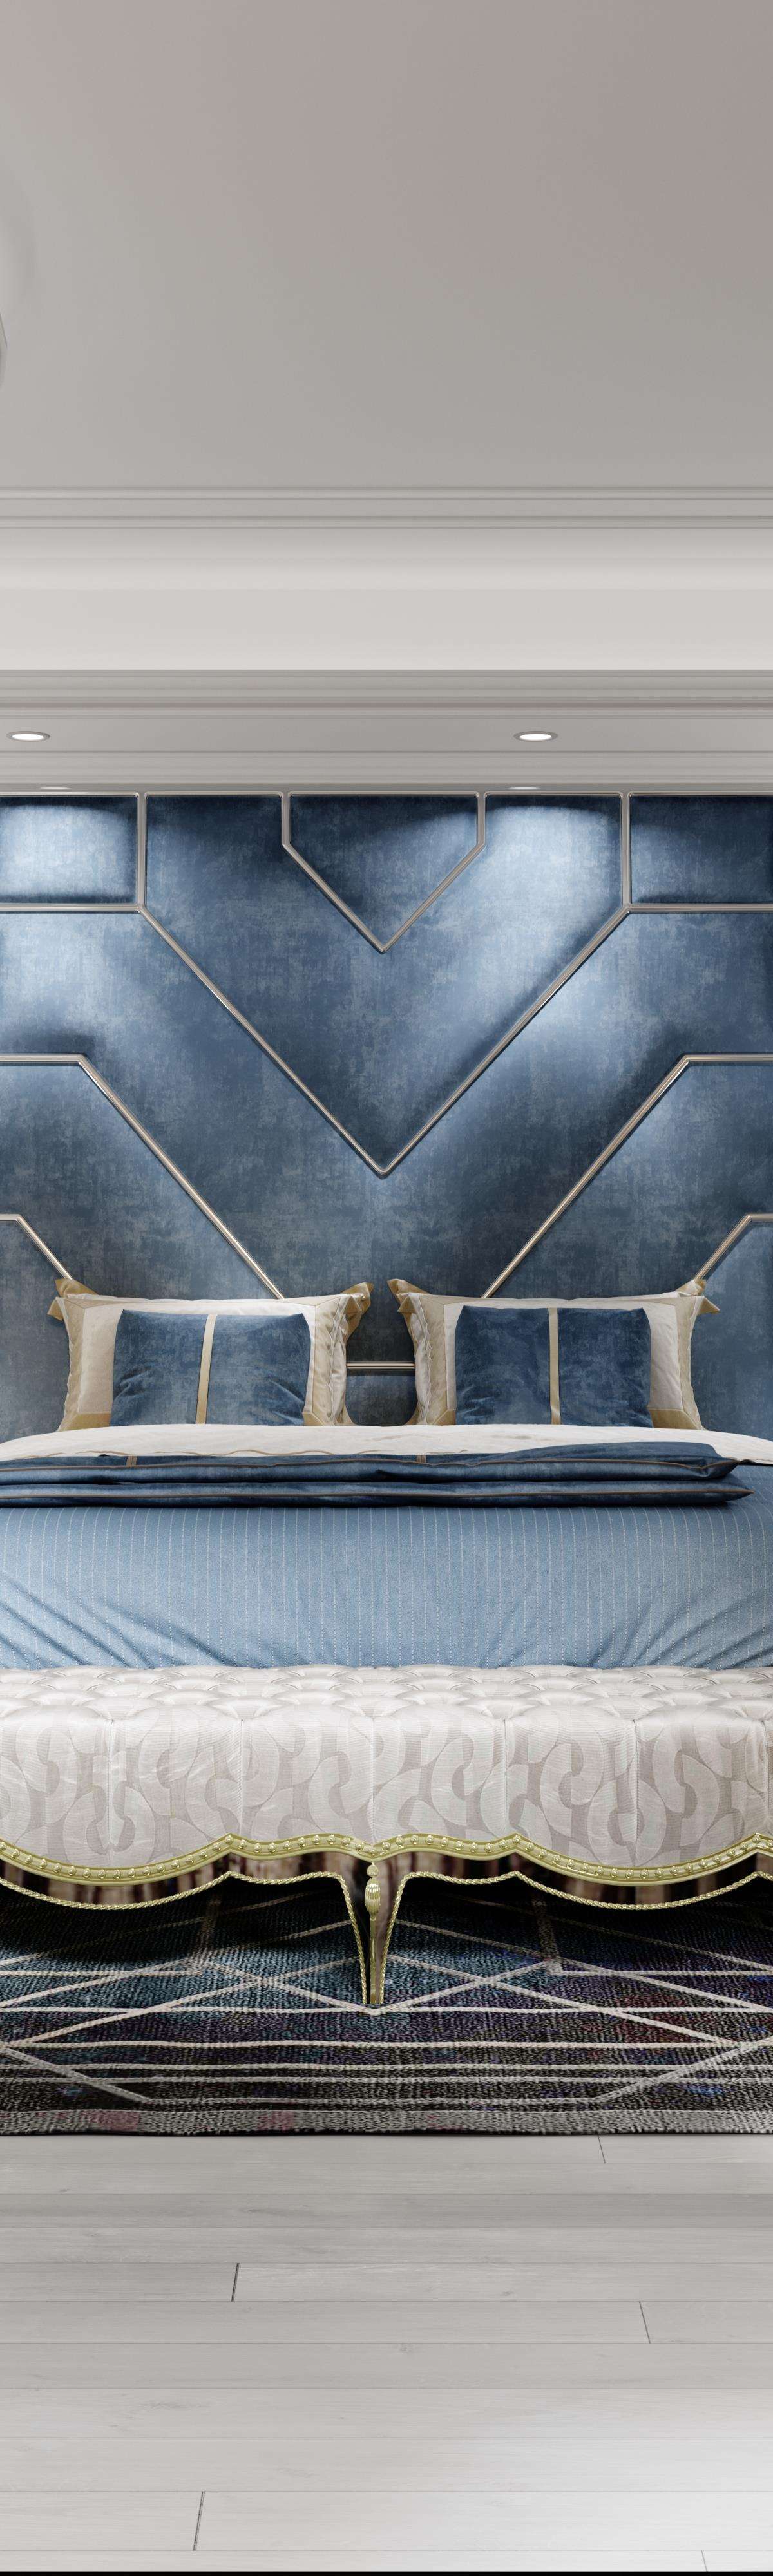 Master Bedroom Design with a Blue Headboard